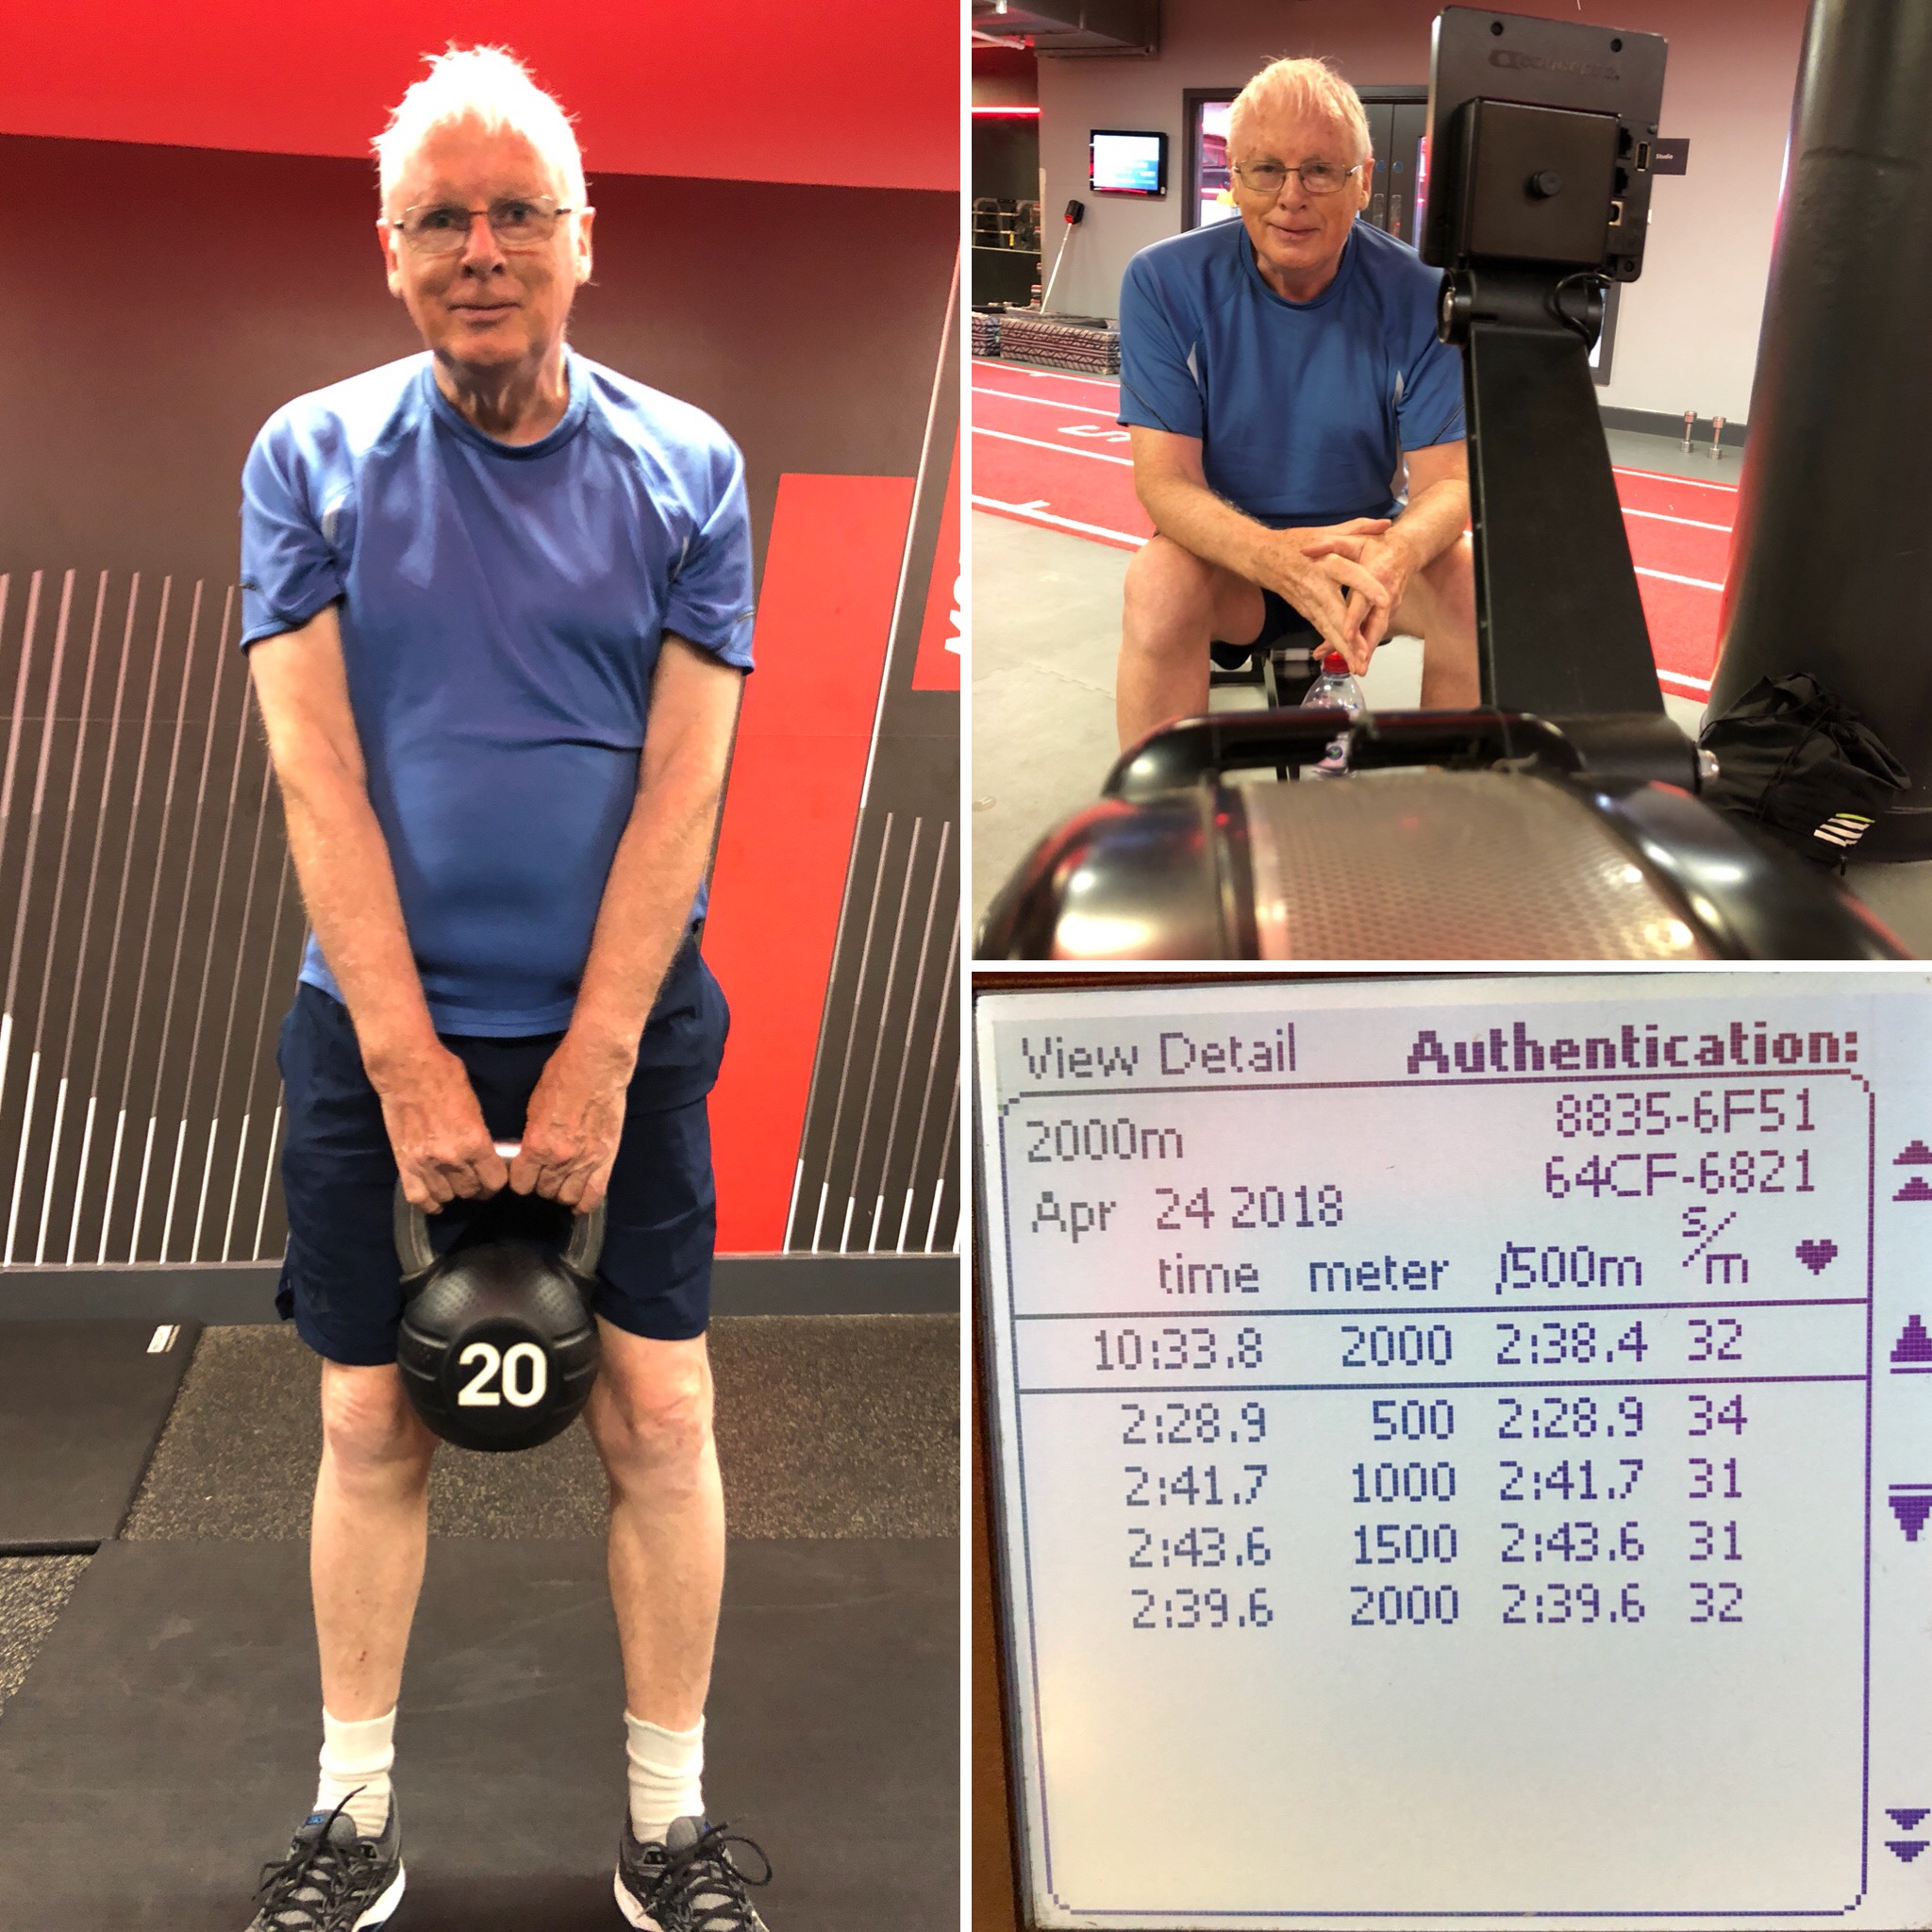 DAVID – AUGUST 2018 CLIENT OF THE MONTH